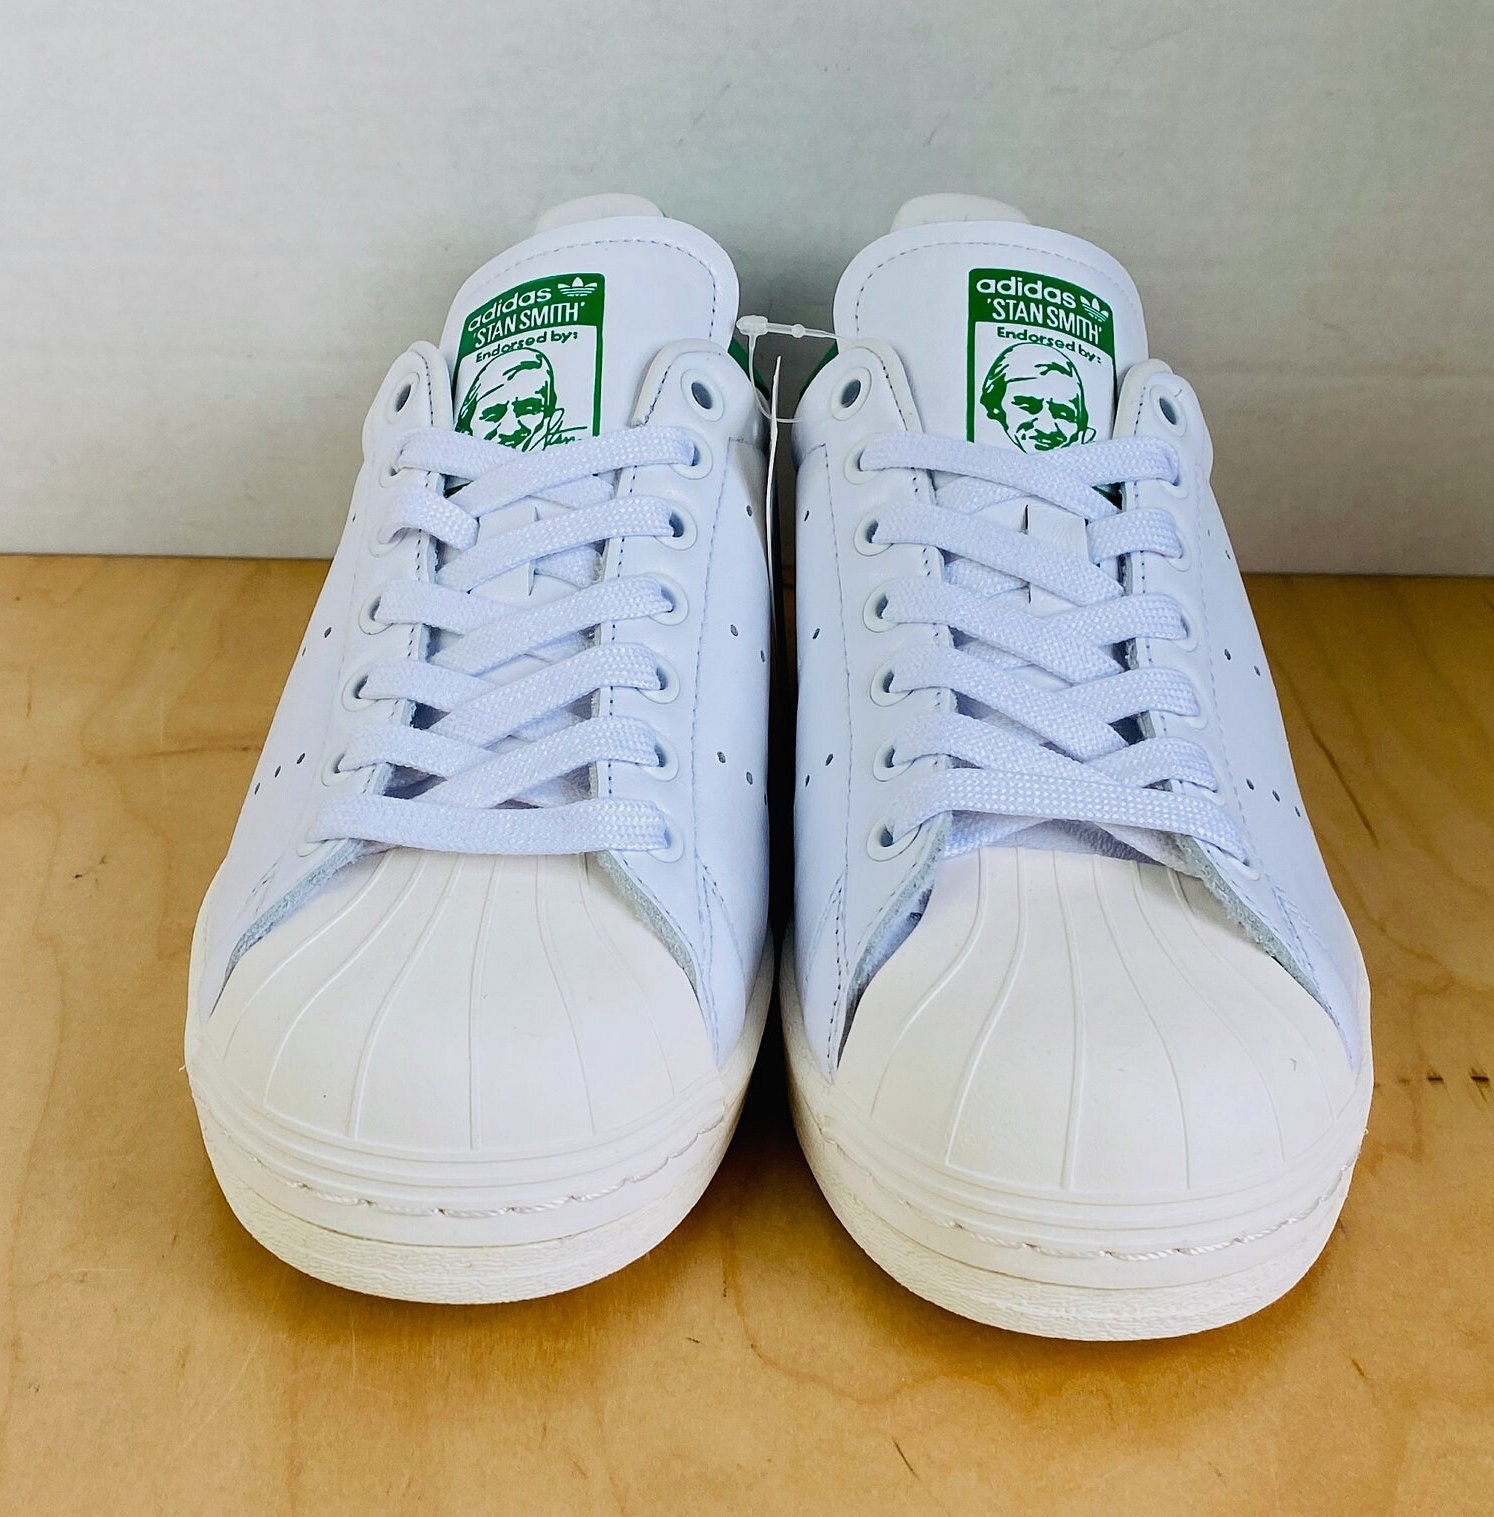 adidas Stan Smith Sneakers for Men for Sale | Authenticity Guaranteed | eBay